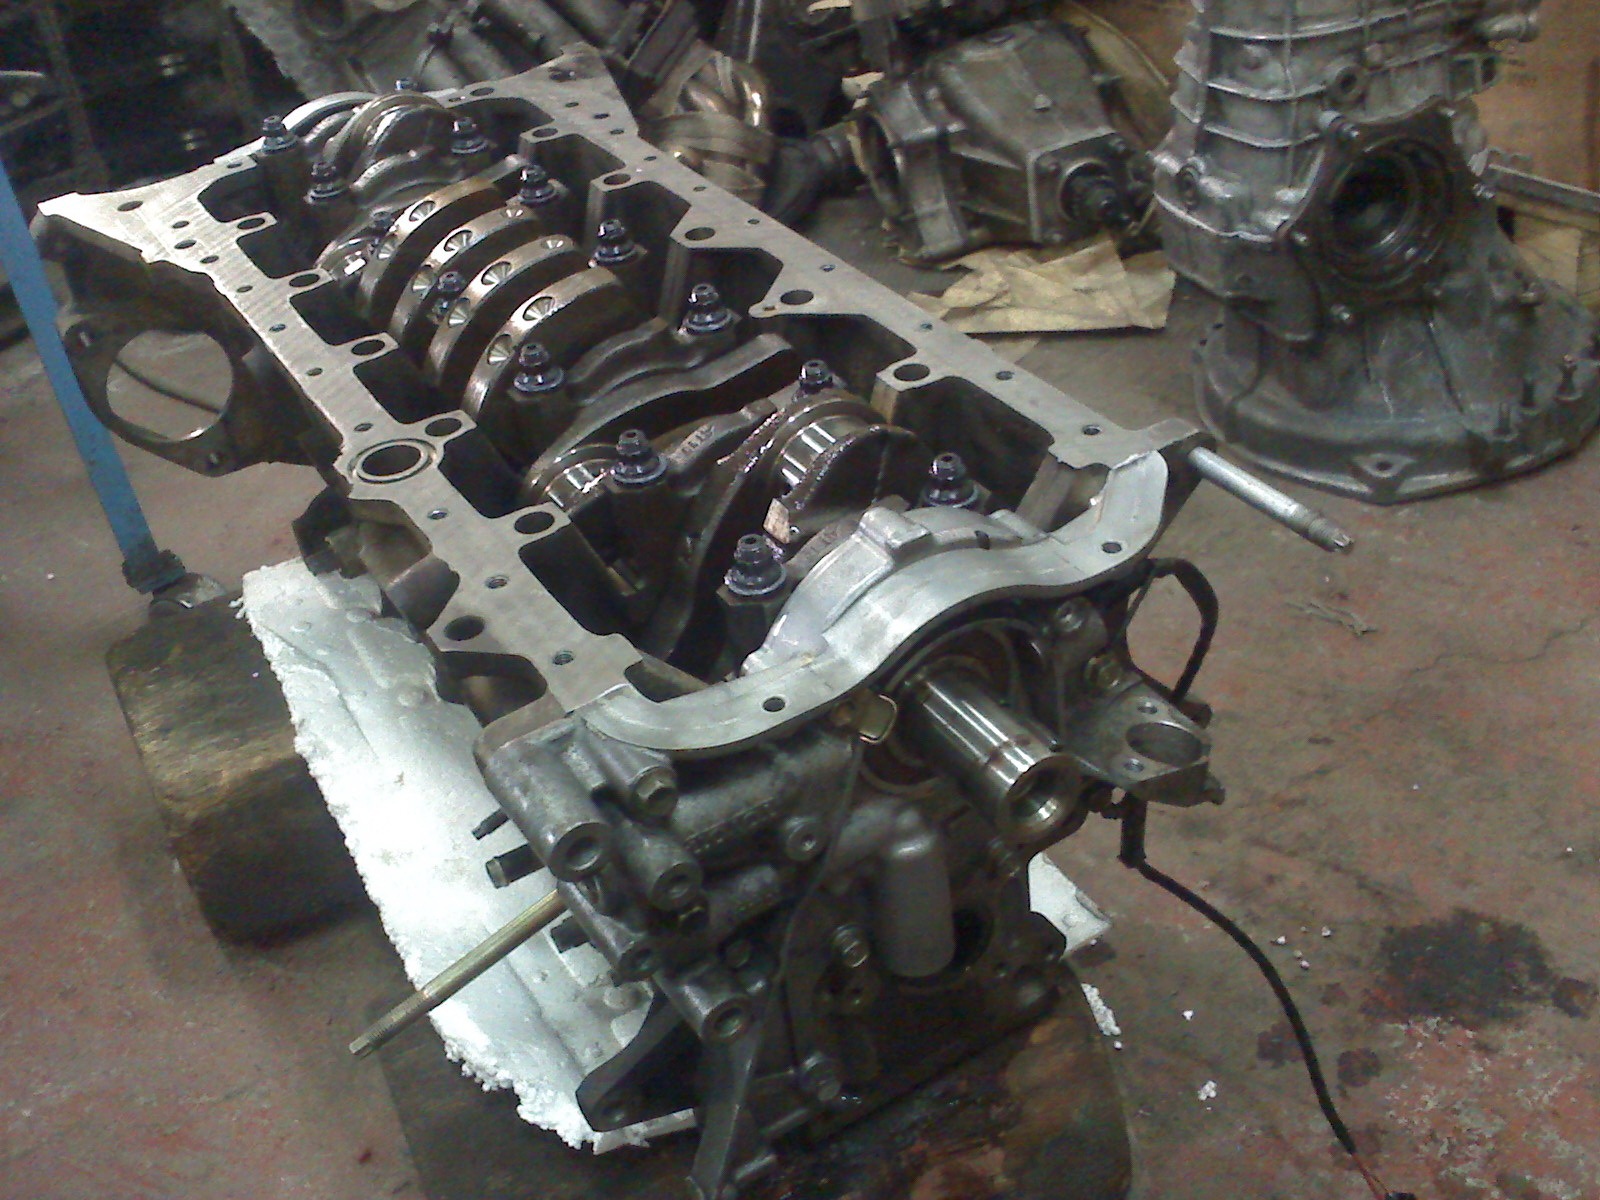 The assembly of the engine and the car has begun - Toyota Altezza 30 L 2003